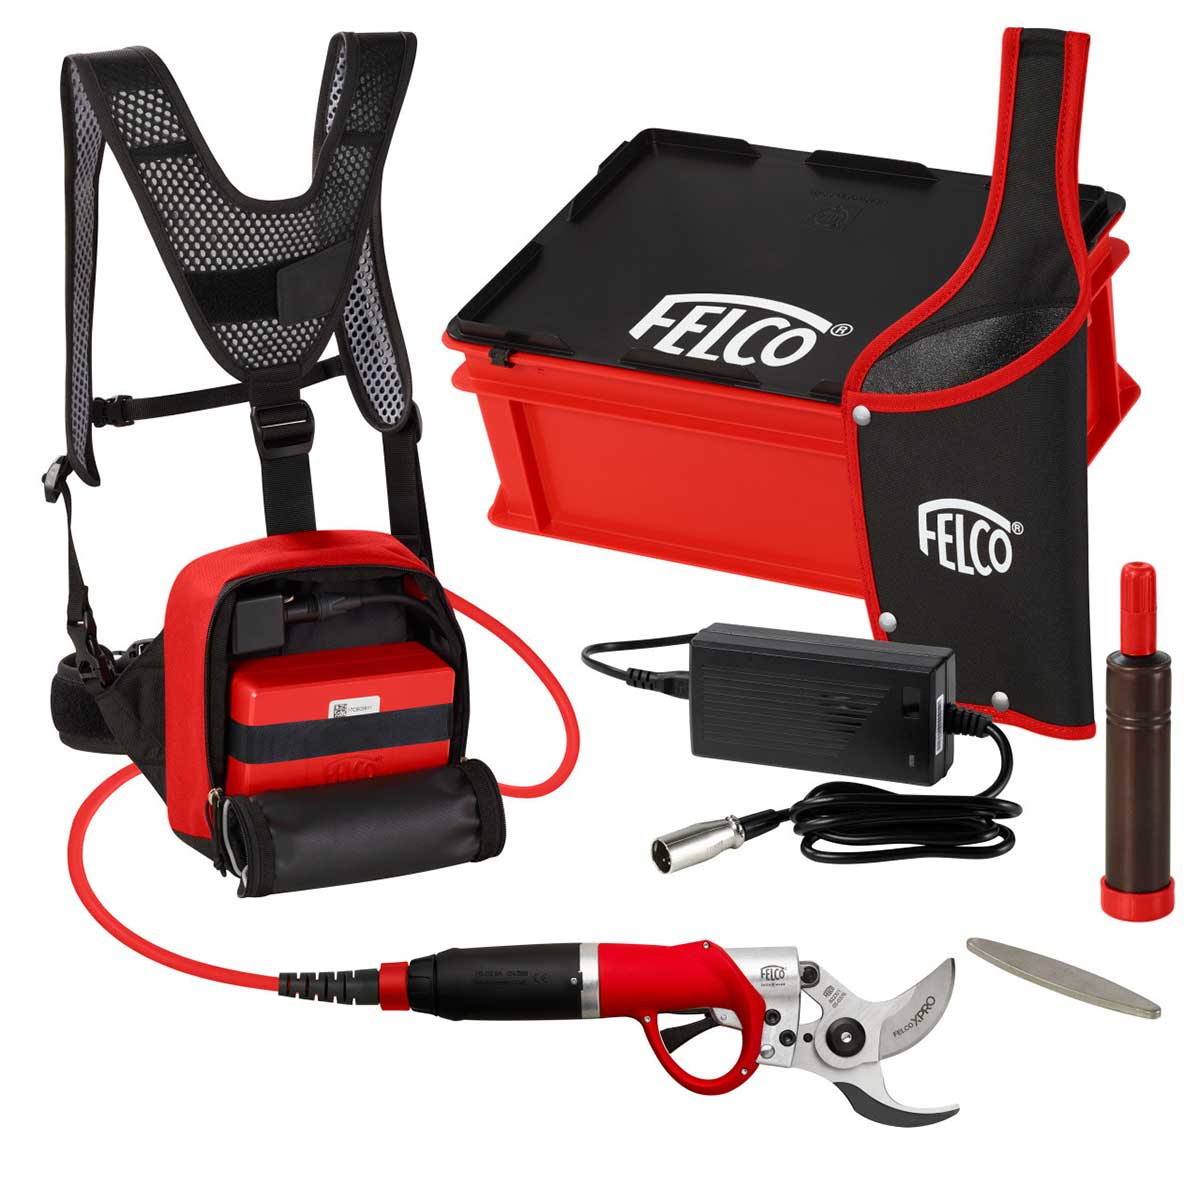 FELCO 822 Electric Pruner Kit with Double Capacity Battery